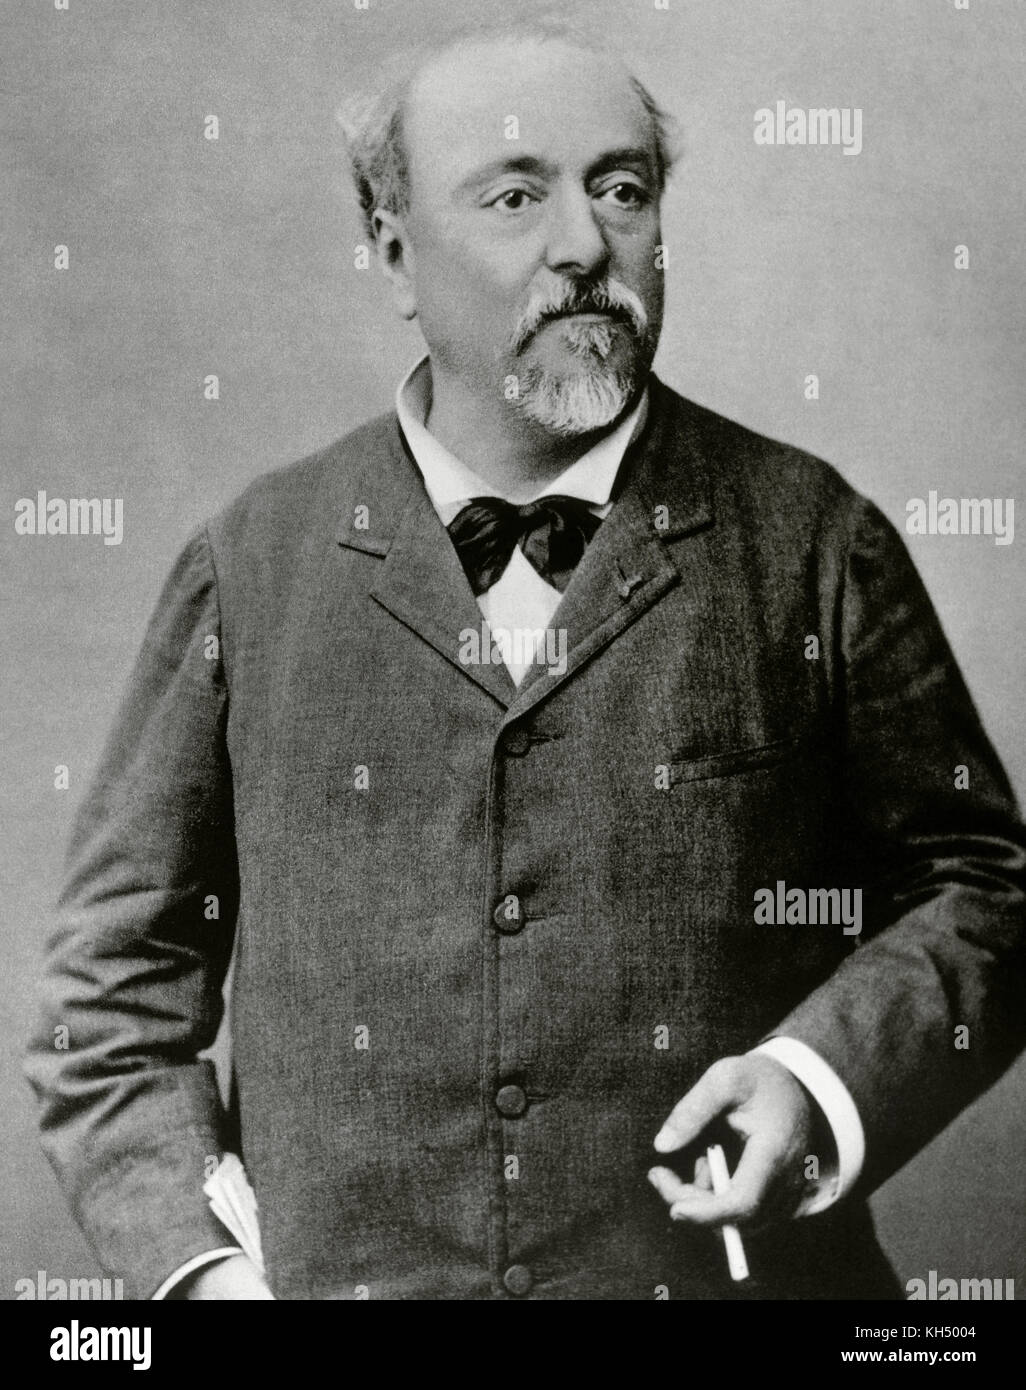 Emmanuel Chabrier (1841-1894). French composer. Portrait. Photography. Stock Photo